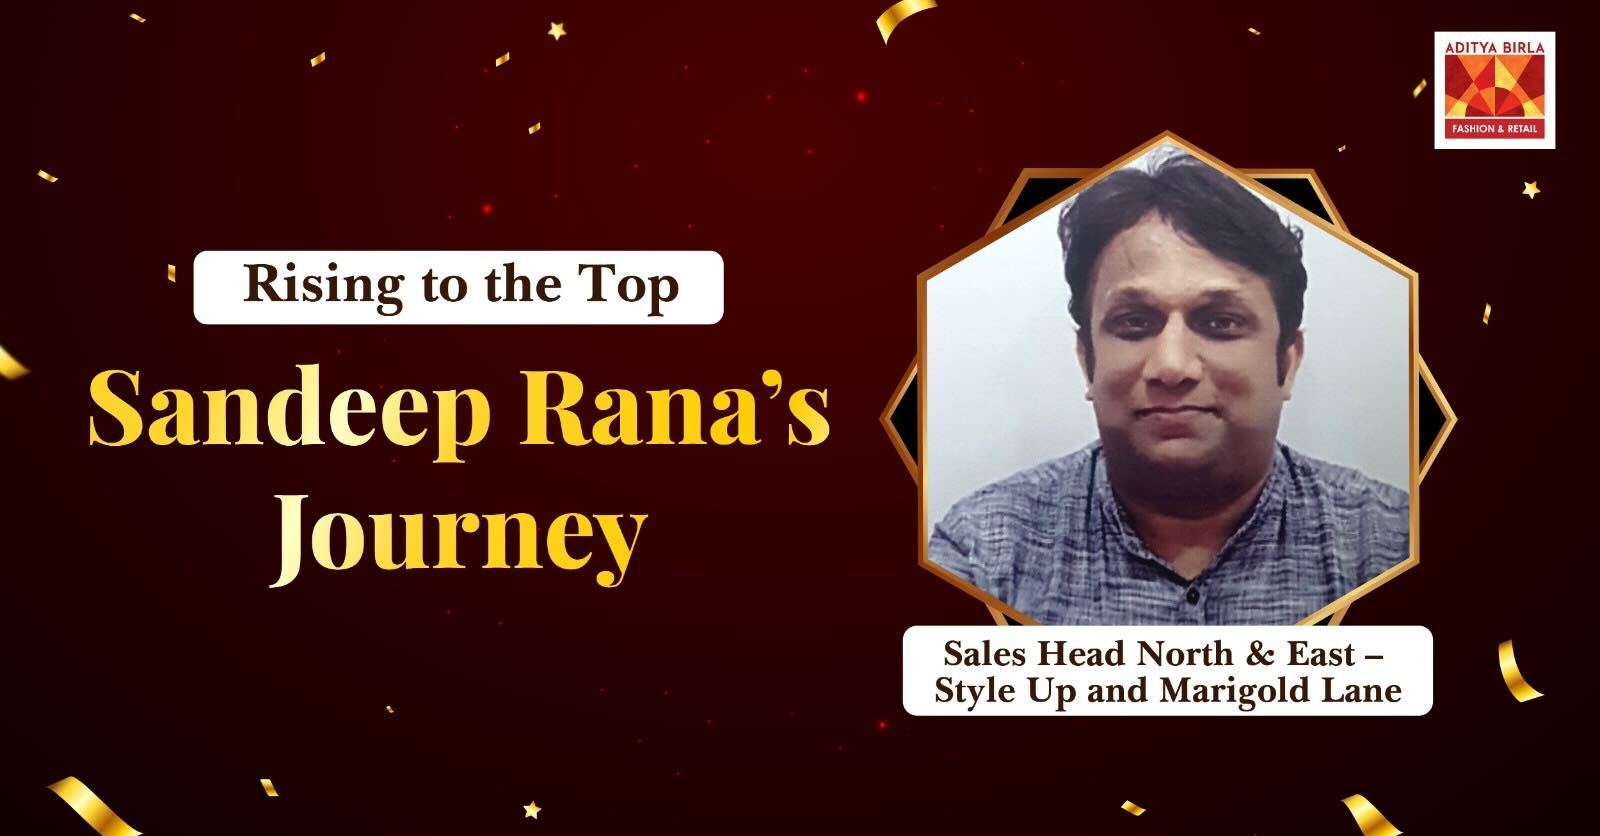 From Store Manager to Regional Sales Head: Sandeep Rana's Remarkable Journey